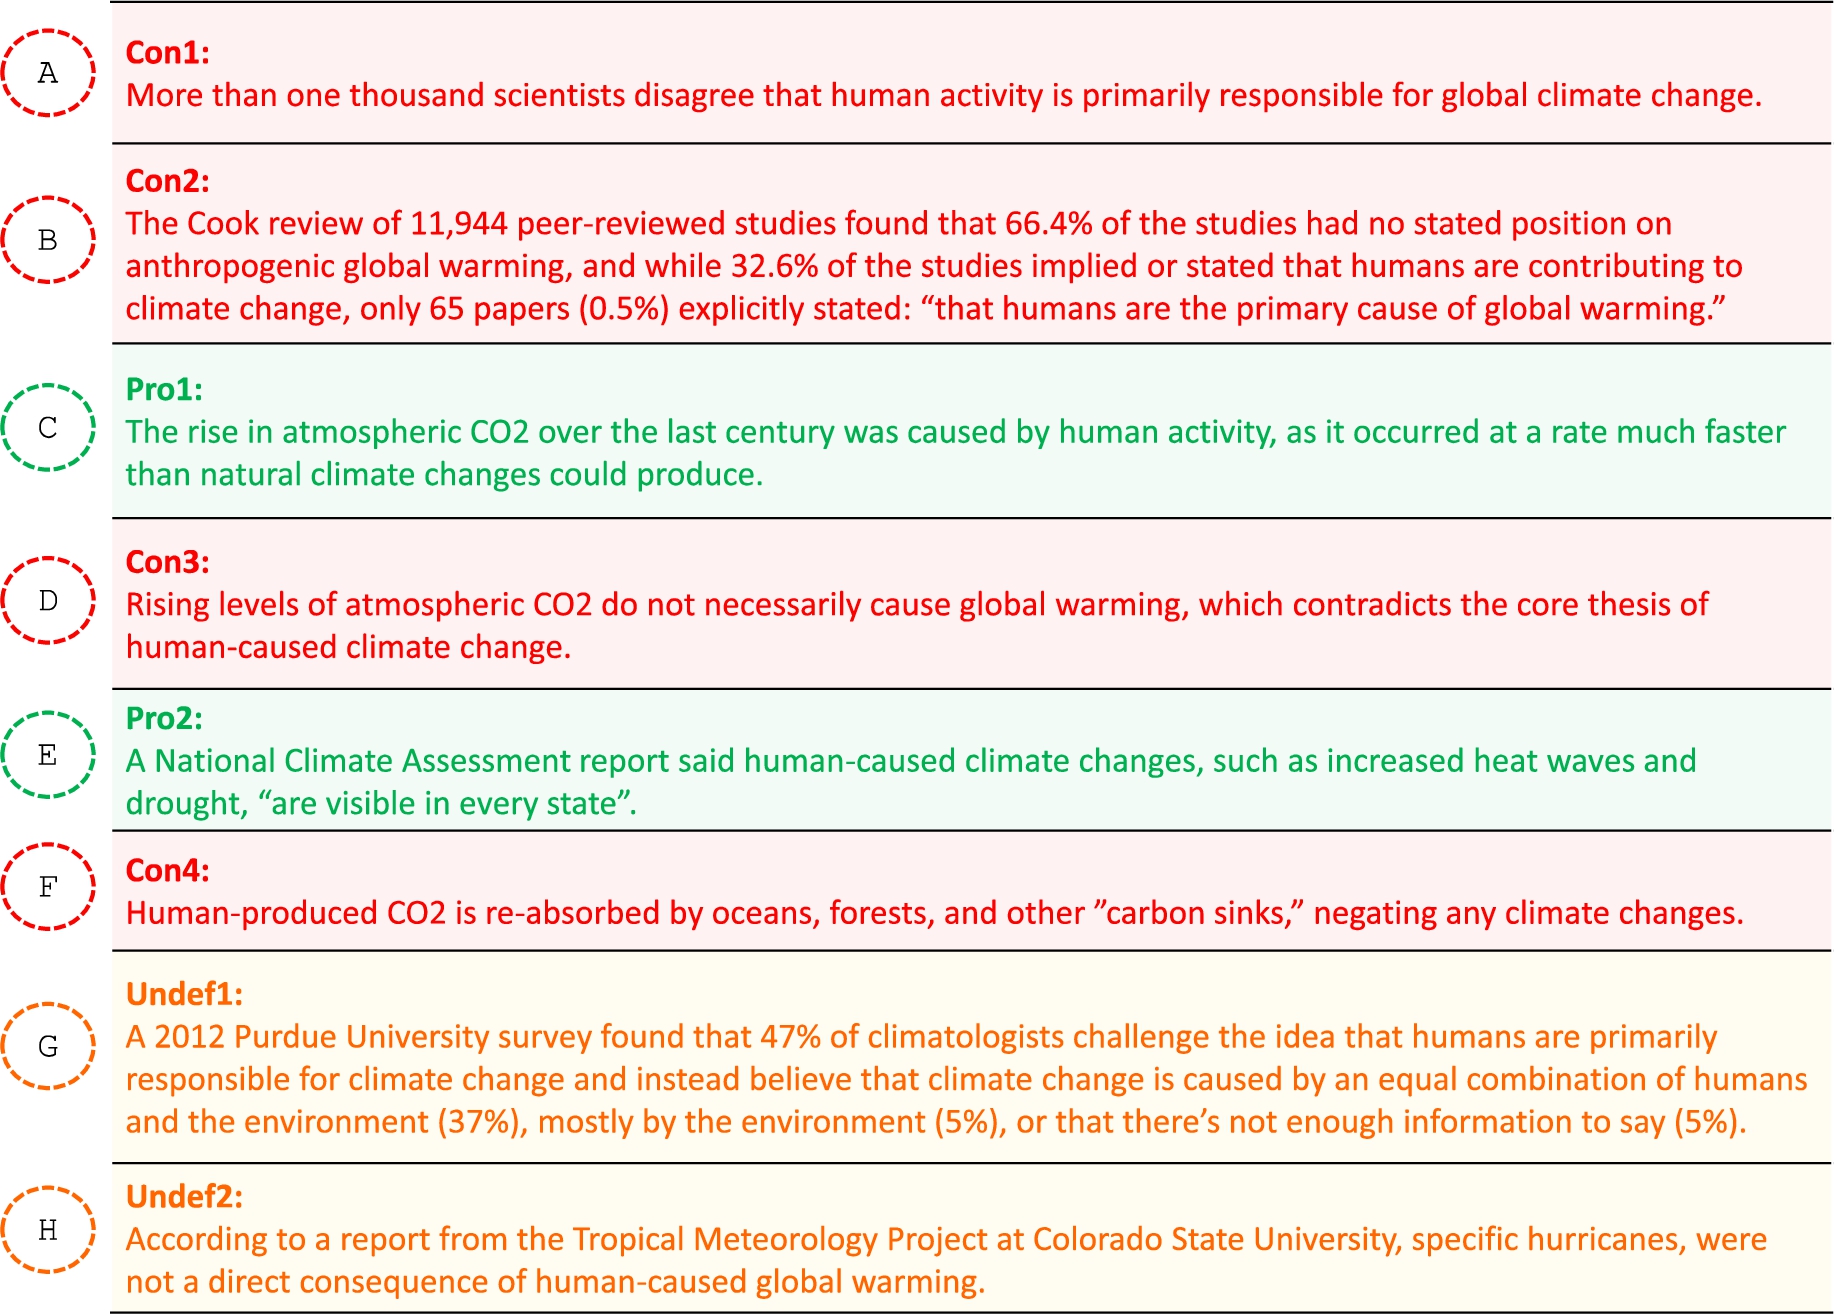 A set of arguments concerning the possible causes of climate change.